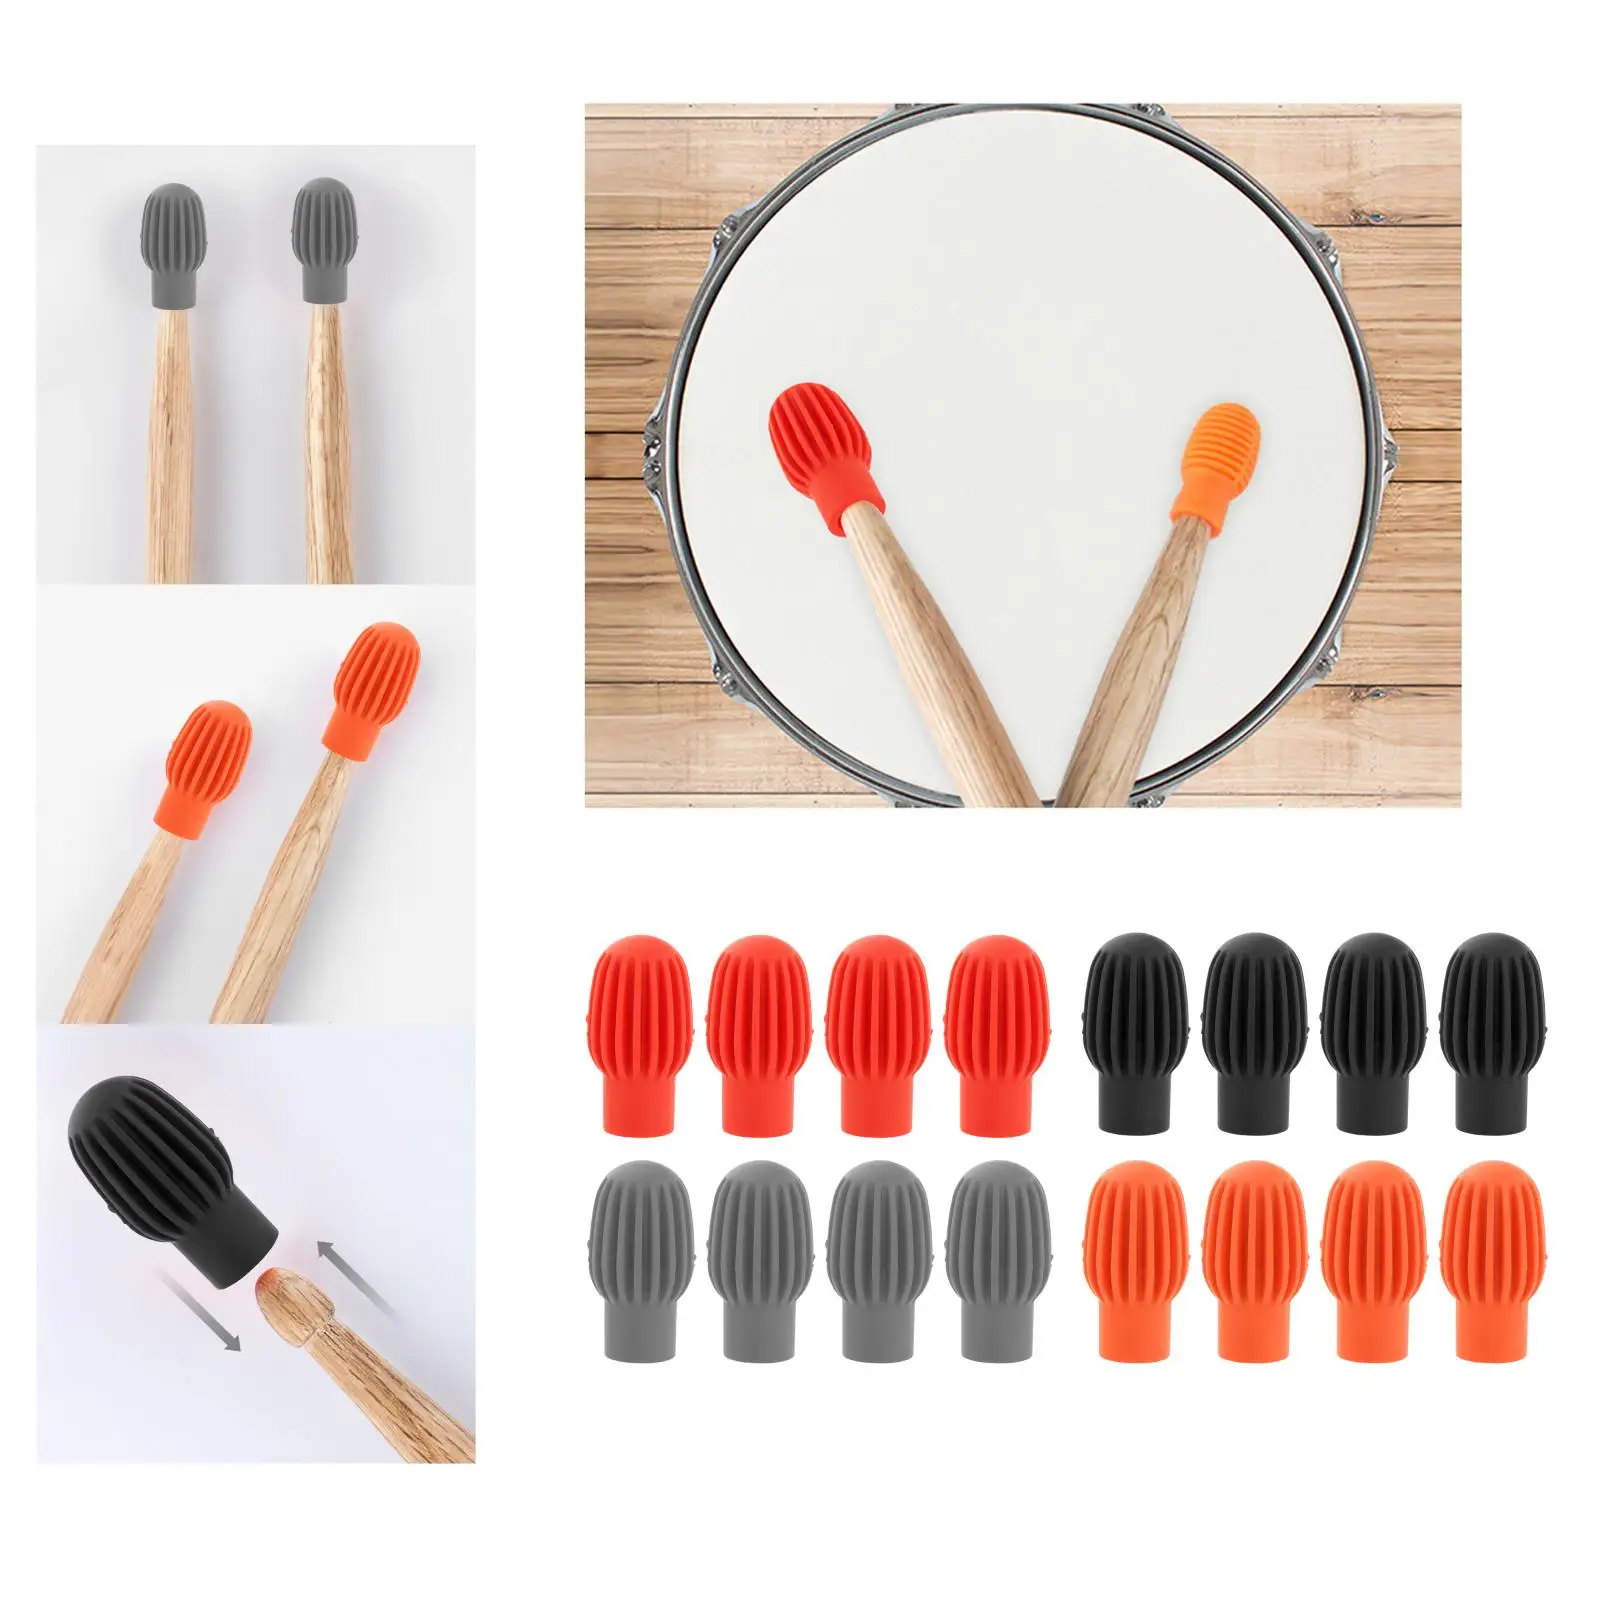 4 Pieces Drum Mute Drum Dampener Silicone Drumstick Percussion Accessory Mute Replacement Musical Instruments Accessory